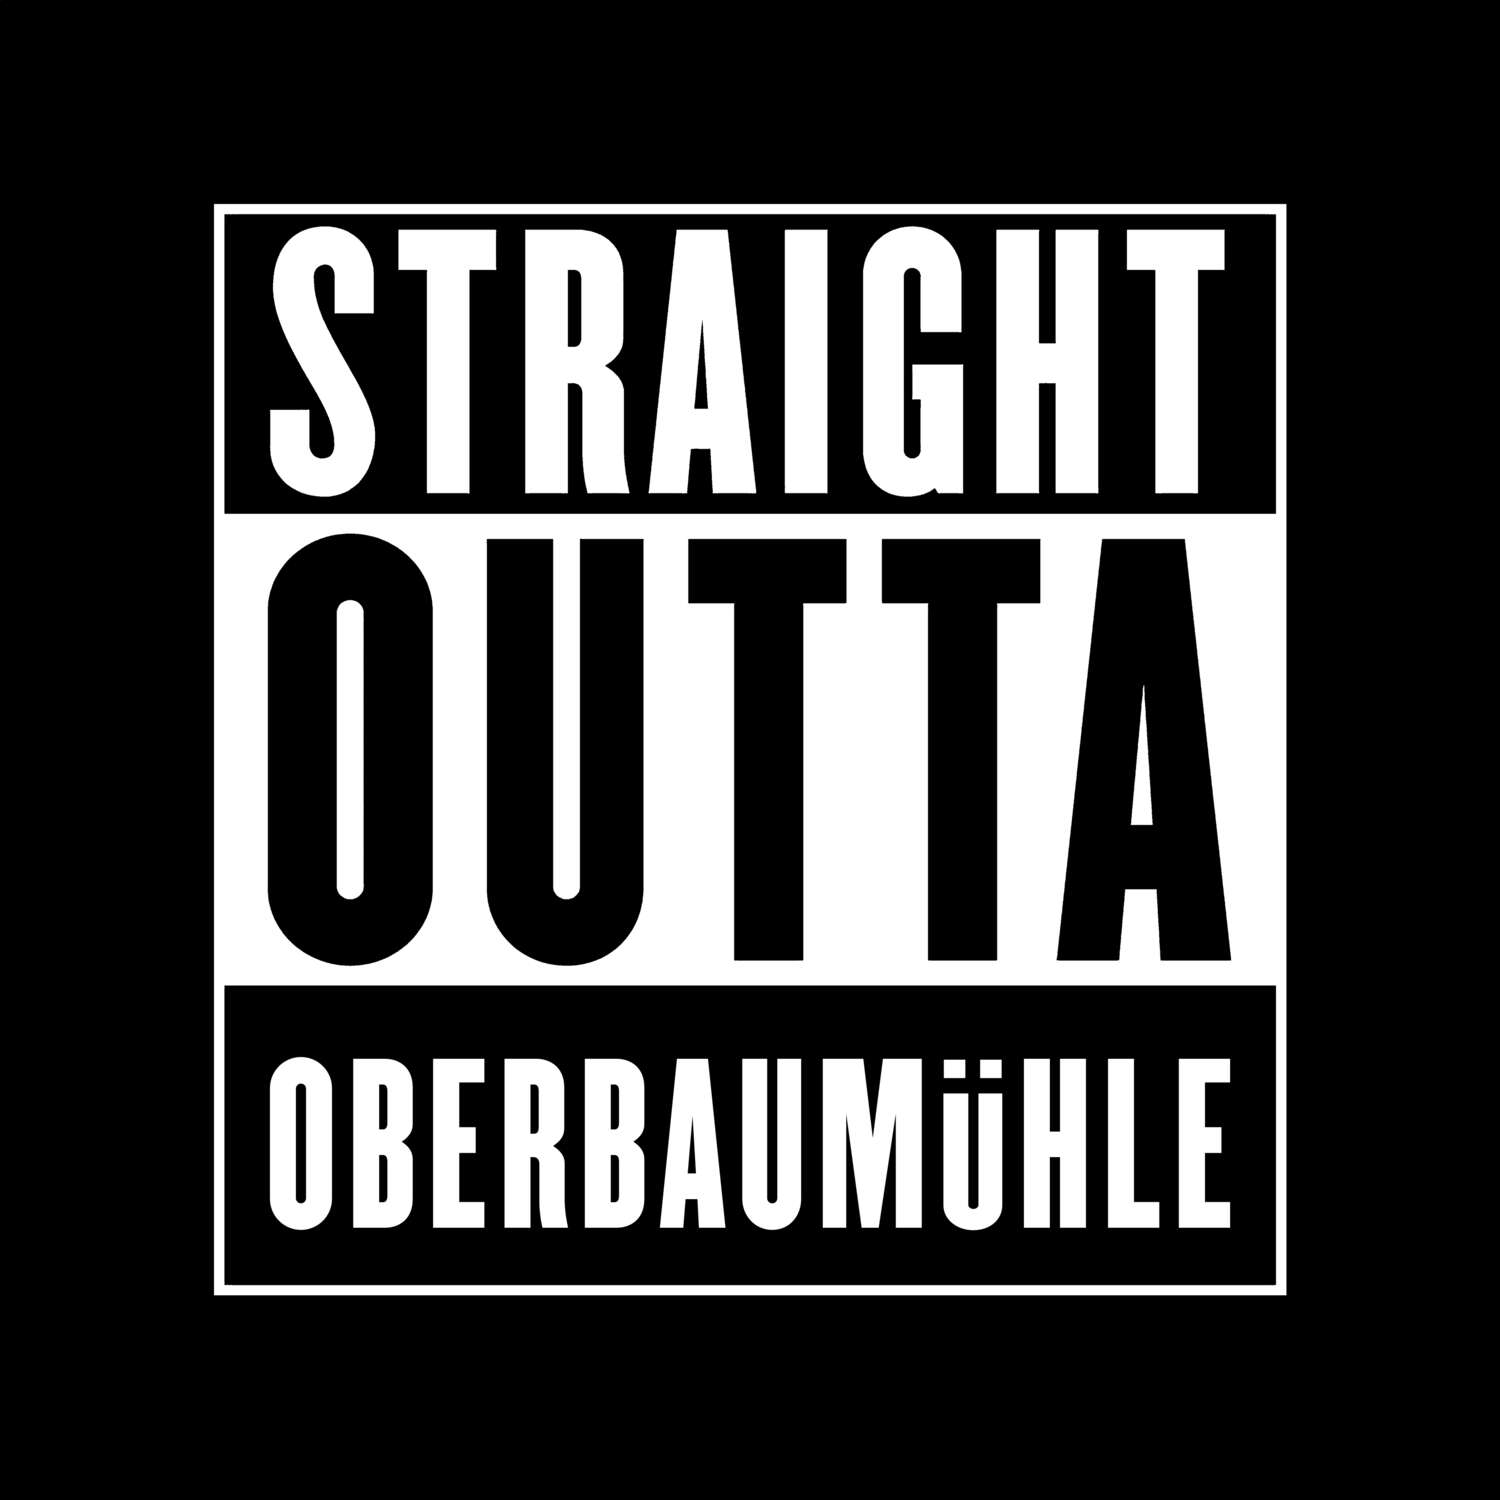 Oberbaumühle T-Shirt »Straight Outta«